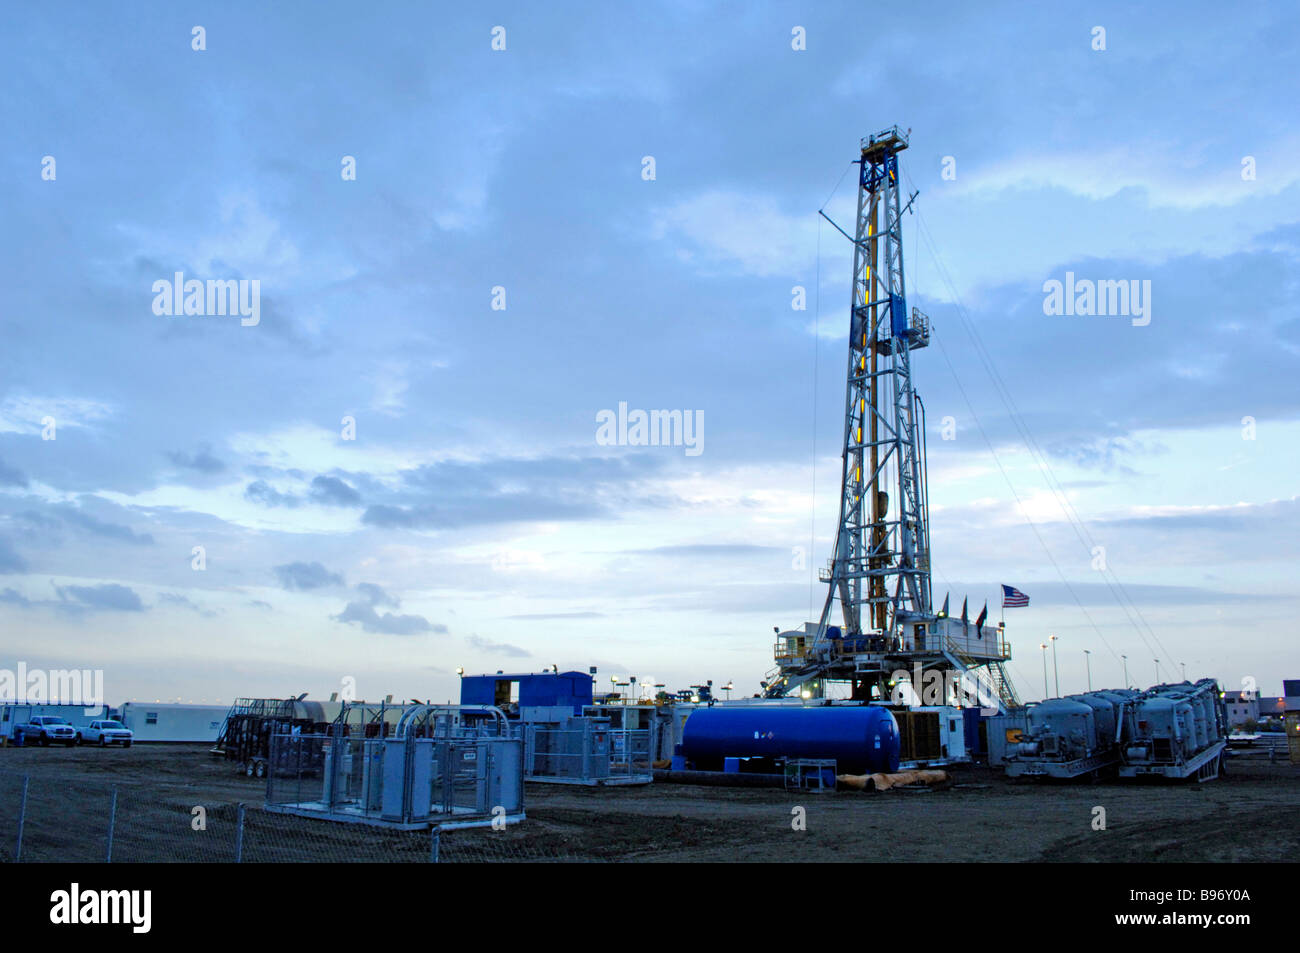 Oil derrick/drilling rig or gas well on public owned airport property signifies the intense search for fossil fuel and energy. Stock Photo